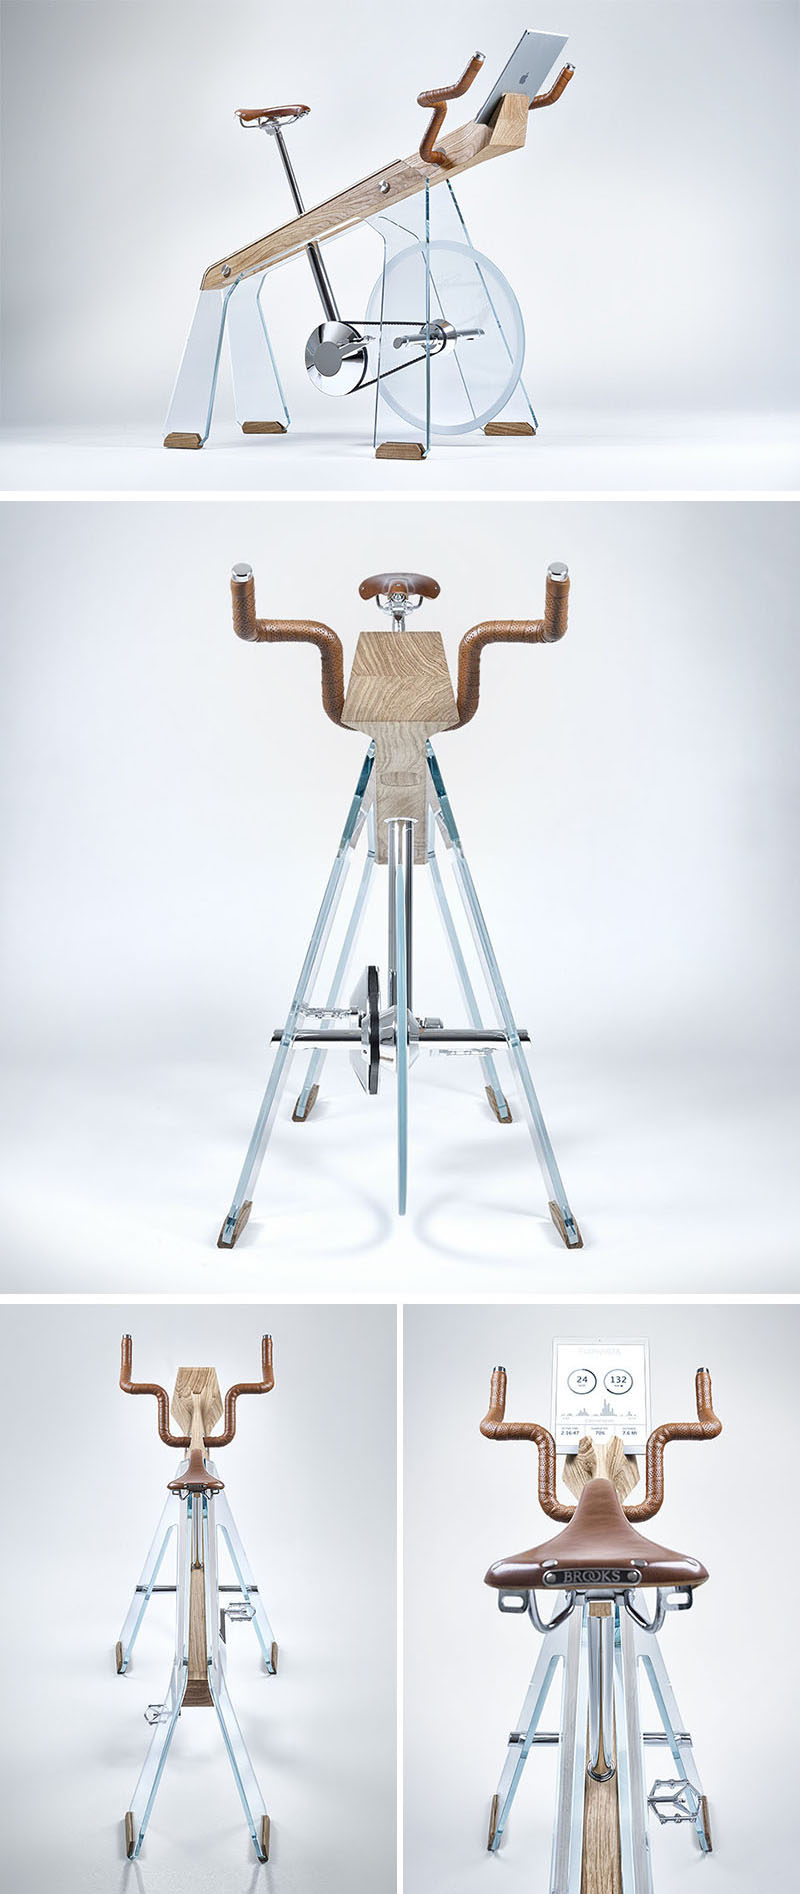 'Freeride' by Adriano Design, is a modern exercise bike that's been designed as an object to desire and show off, but at the same time, is practical and can be ridden. Built from glass, wood and steel, the exercise bike also has a tablet holder, so that the rider can watch bike routes from around the world while they work out.